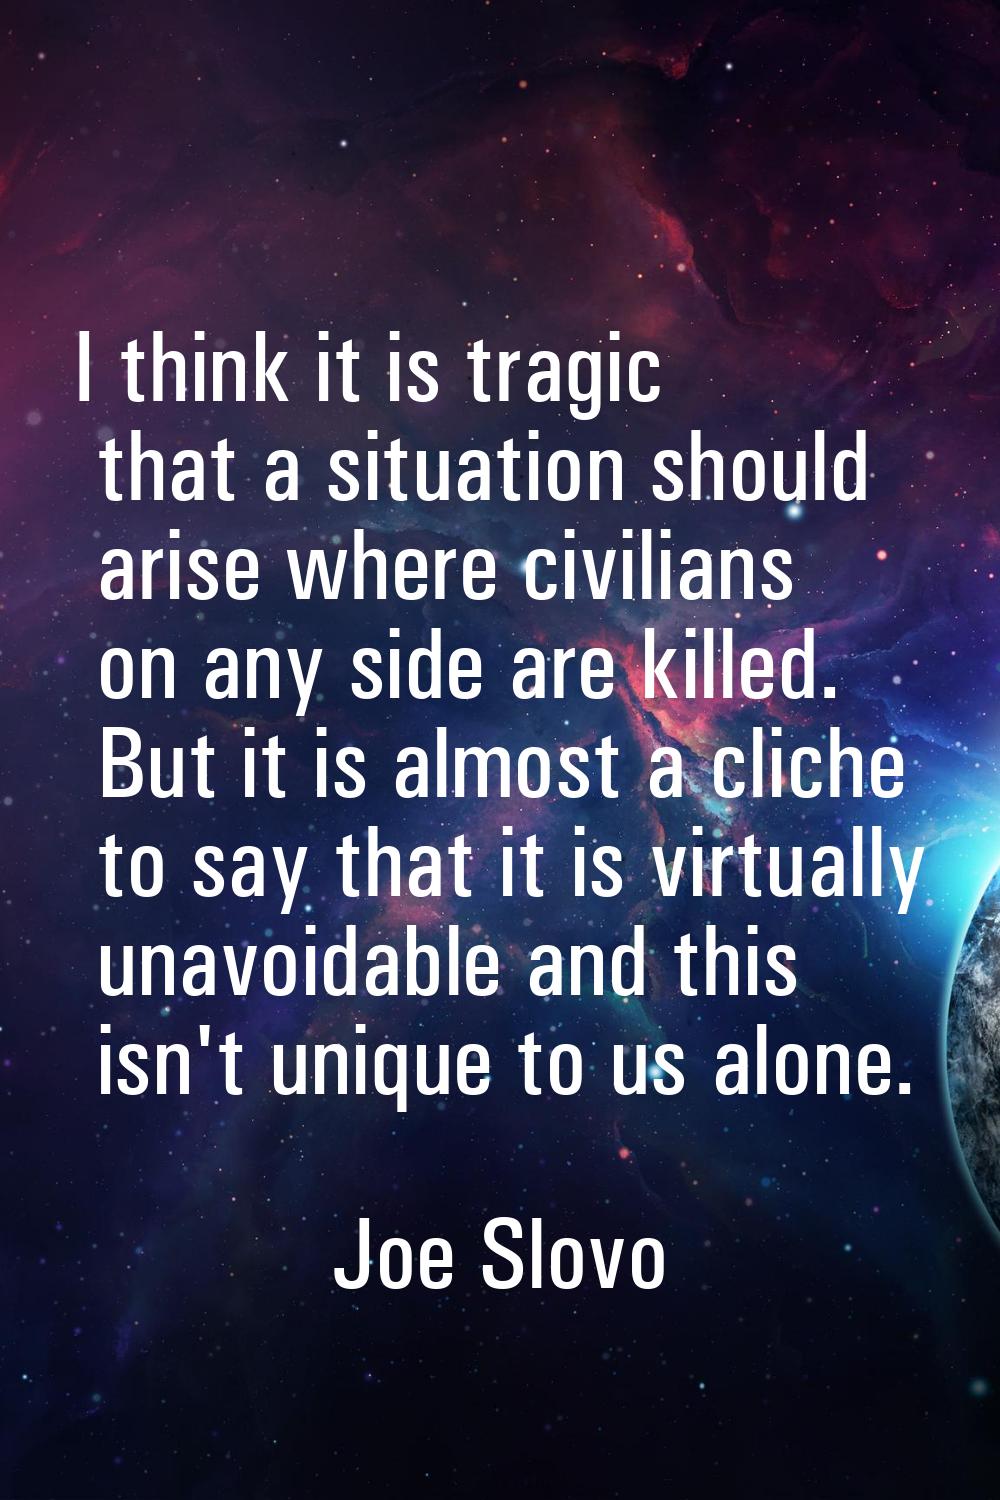 I think it is tragic that a situation should arise where civilians on any side are killed. But it i